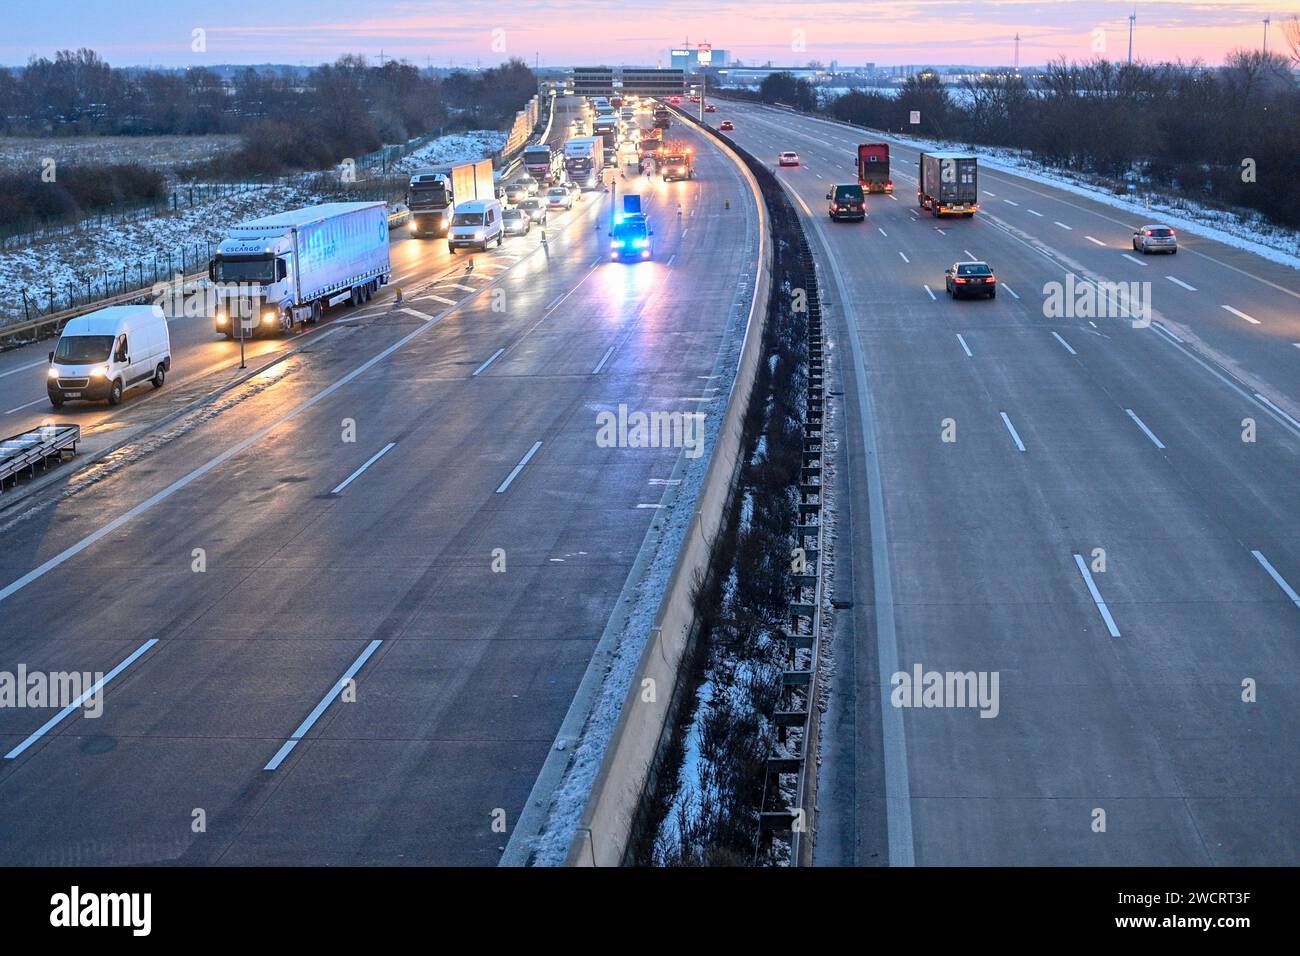 17 January 2024, Saxony-Anhalt, Magdeburg: Traffic on the A2 freeway is being diverted past the scene of an accident via the Magdeburg Zentrum exit and slip road. A 78-year-old wrong-way driver was killed in an accident there on Wednesday morning. Another person was seriously injured, according to the police. The man had driven onto the highway in the wrong direction. On the carriageway towards Hanover, his car then collided head-on with a van and hit another vehicle. The wrong-way driver died at the scene of the accident. One person in the van suffered serious injuries. Photo: Klaus-Dietmar G Stock Photo